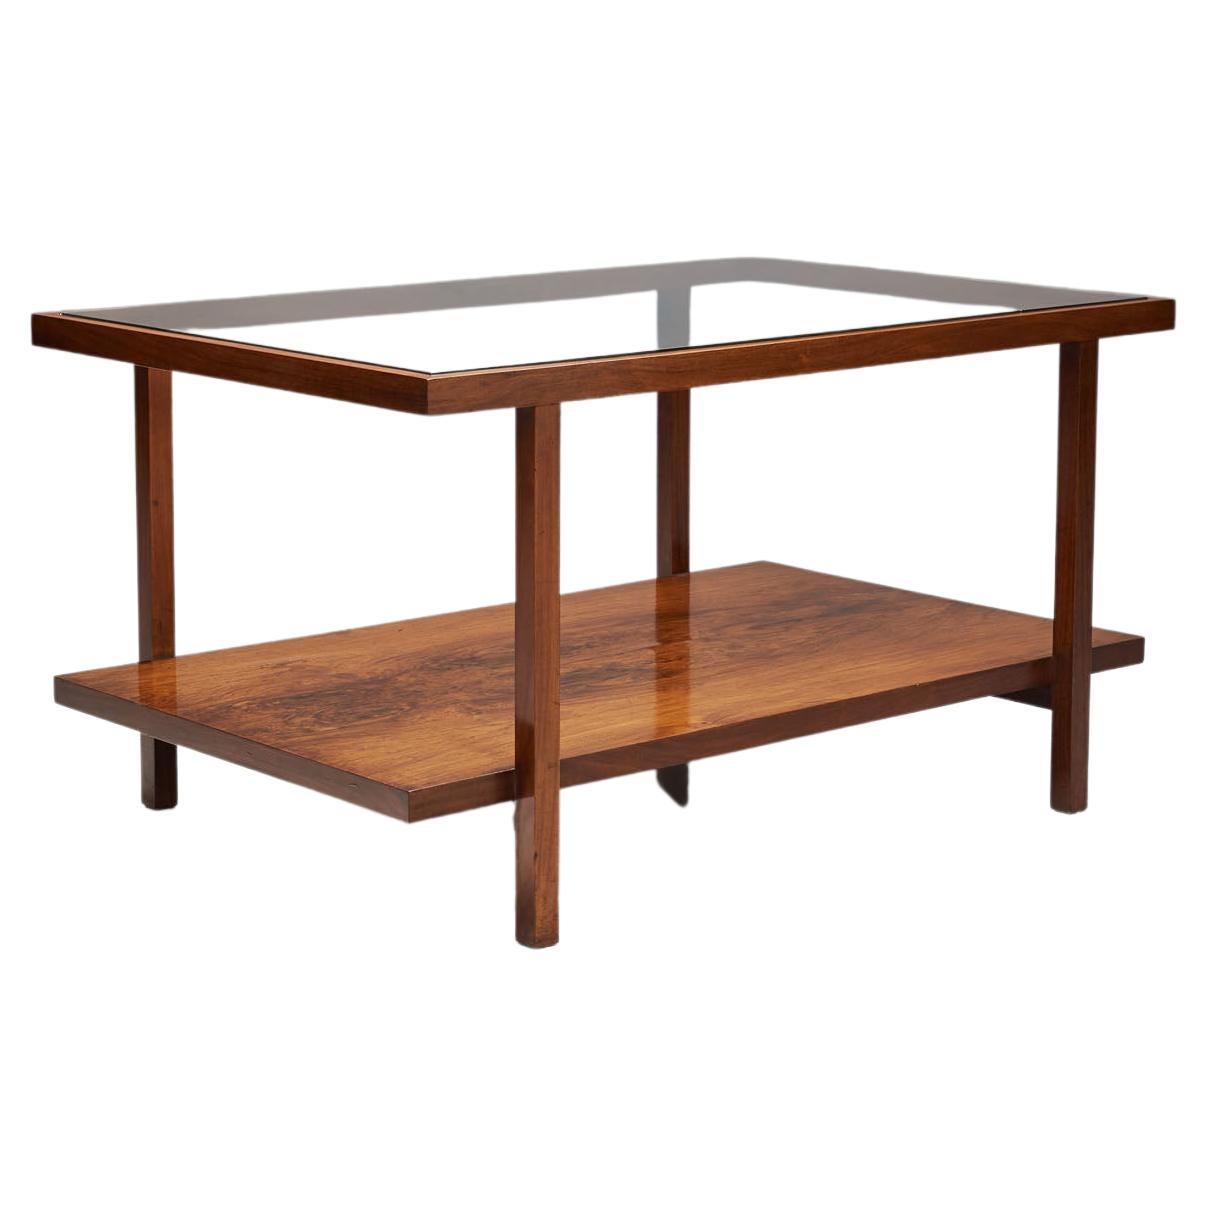 Rectangular Branco and Preto Wooden Coffee Table, Brazil, 1960s For Sale